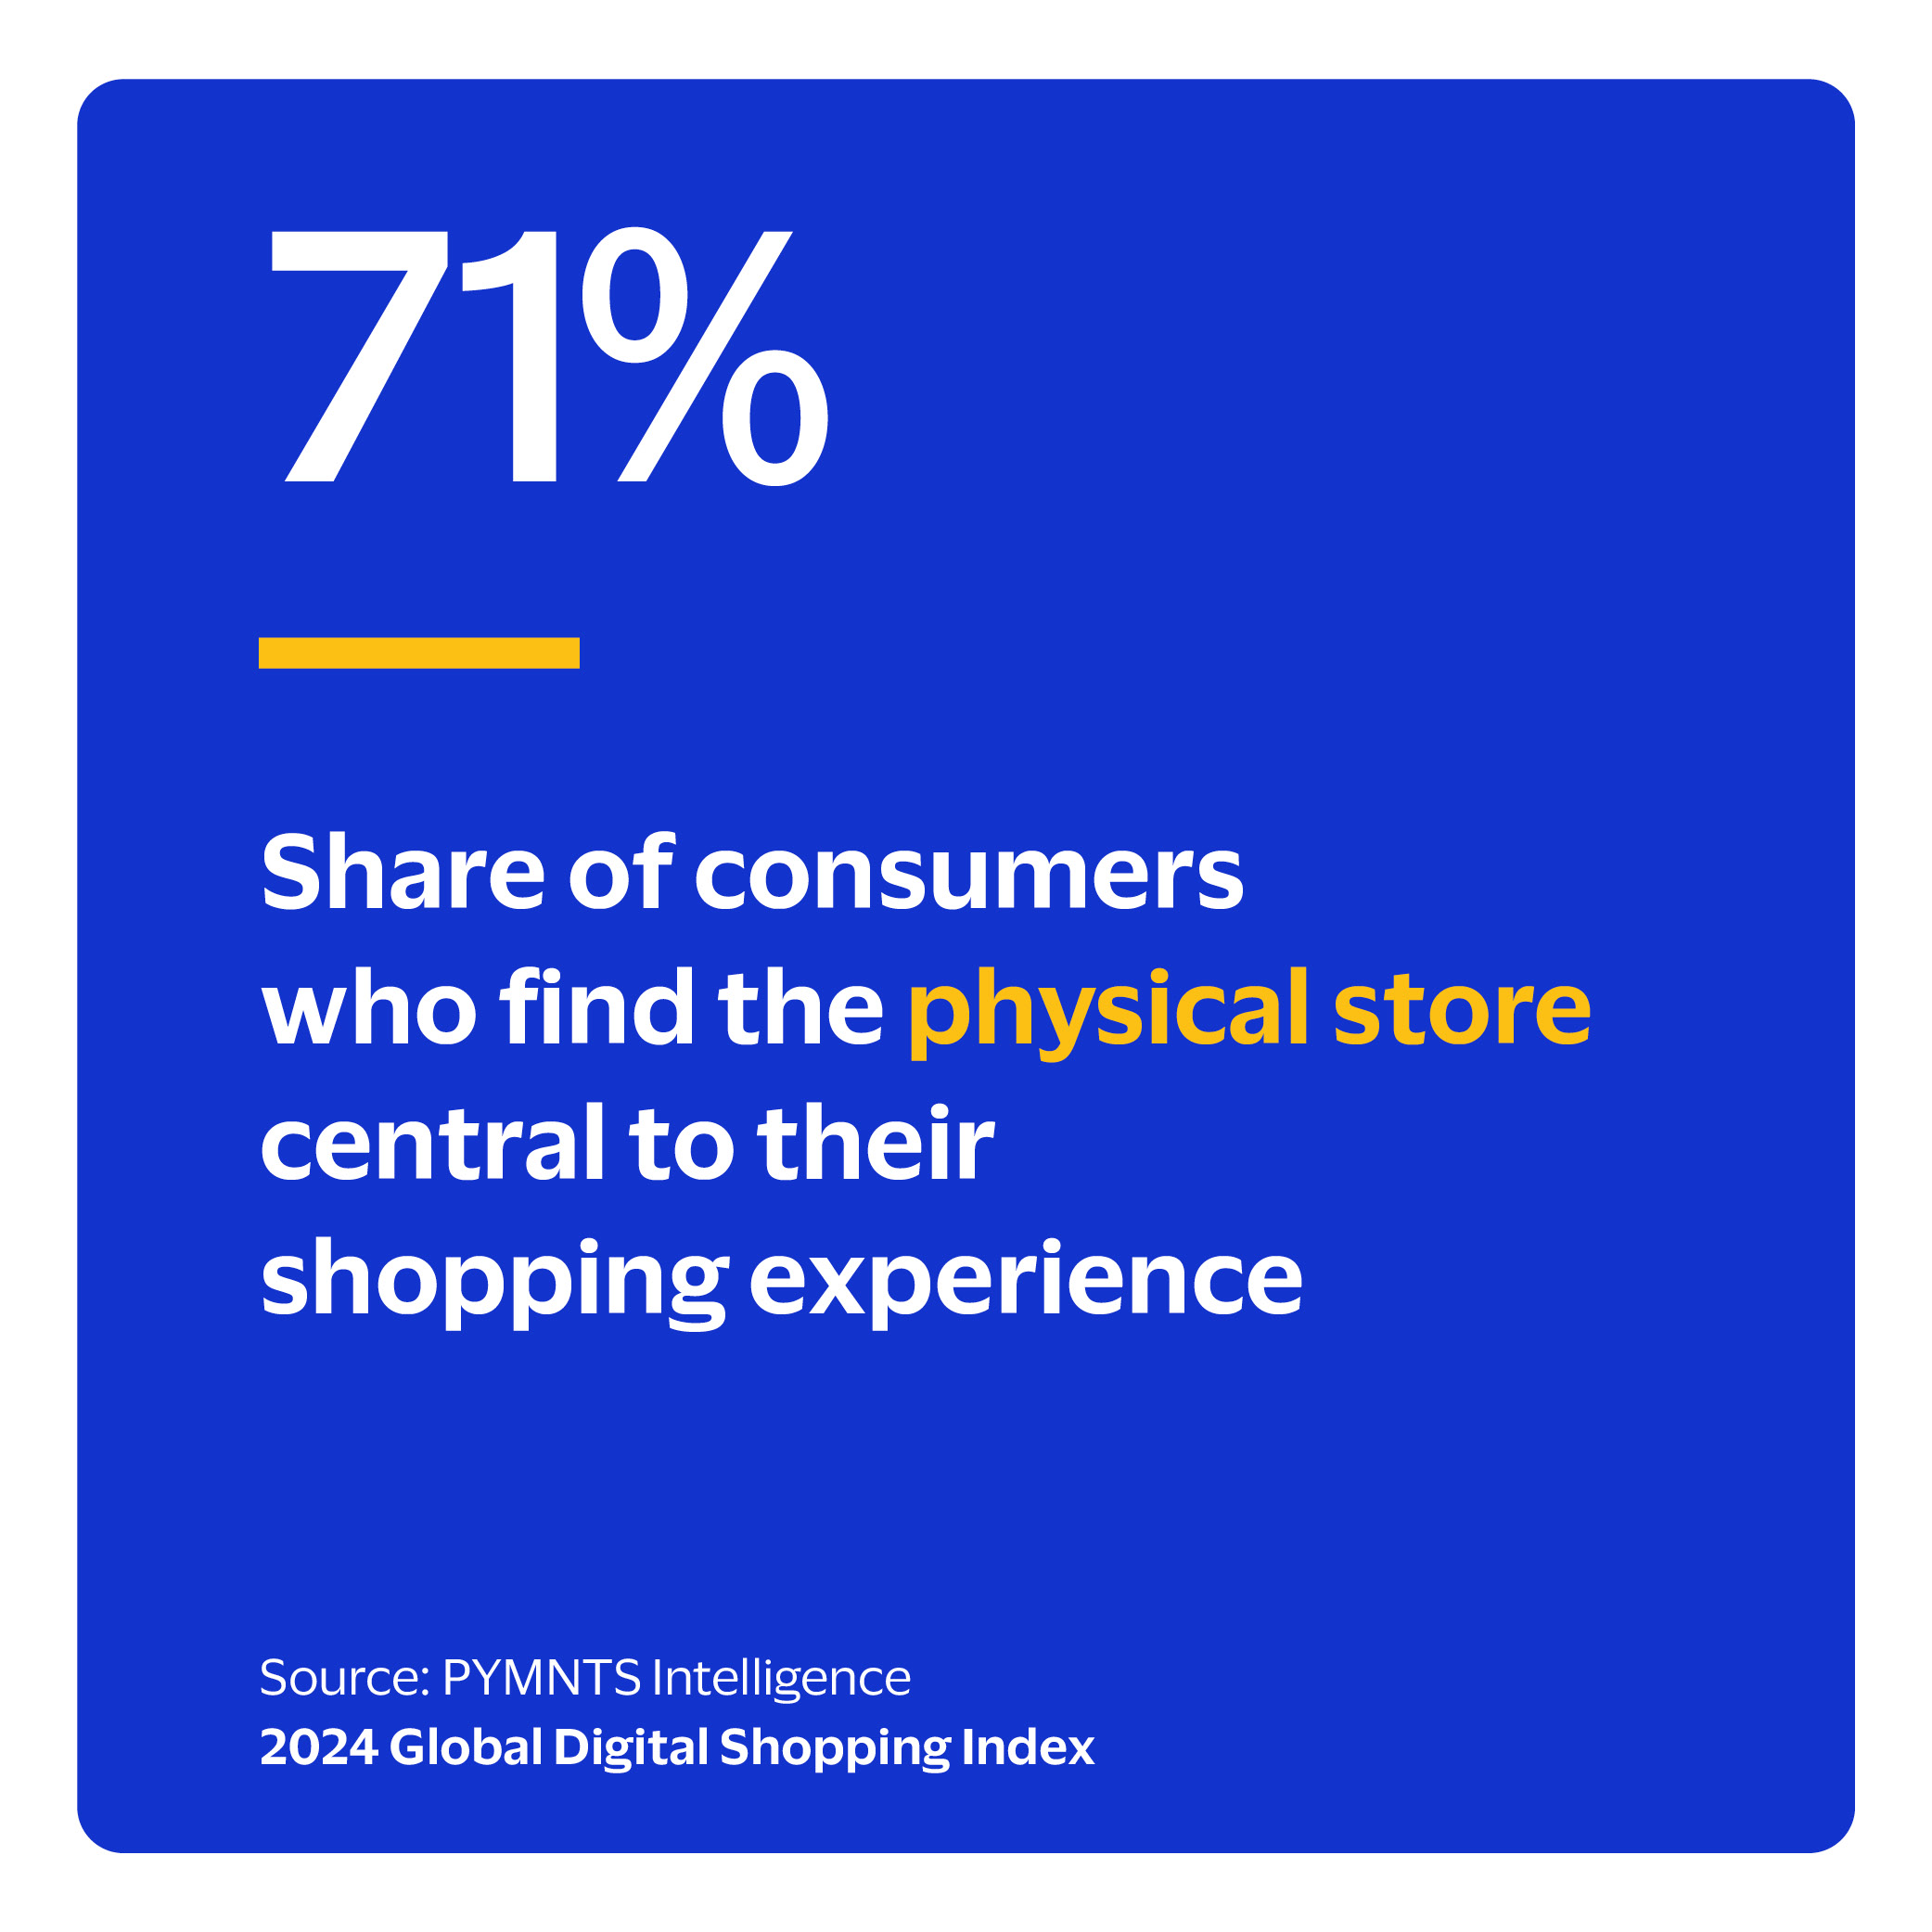 71%: Share of consumers who find the physical store central to their shopping experience